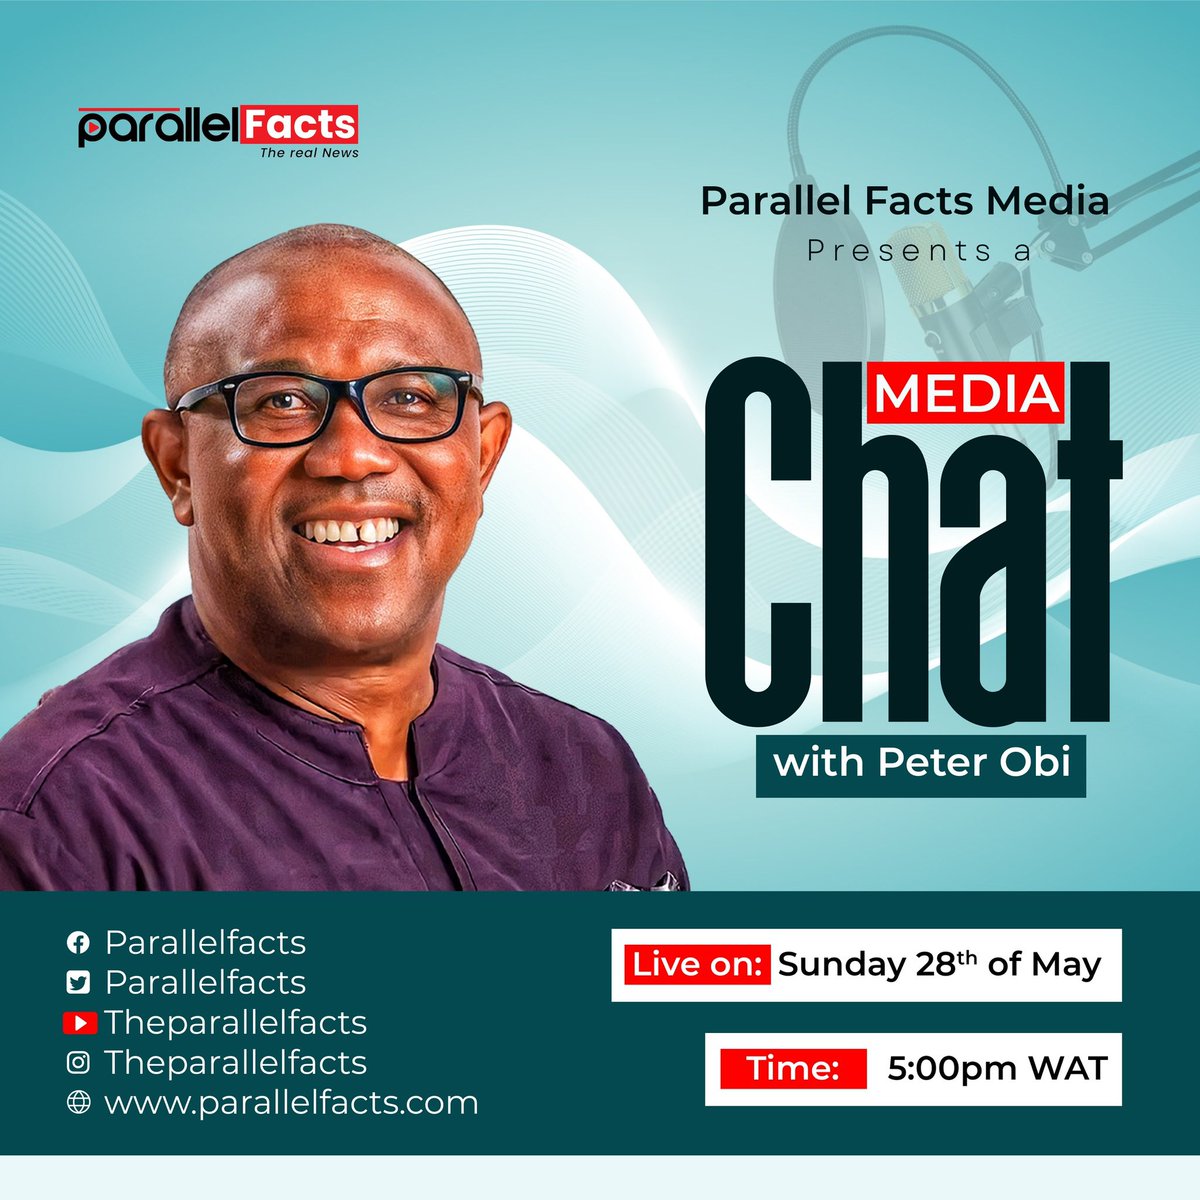 On Sunday May 28th 2023, the man Nigerians voted for @PeterObi will be live @ParallelFacts by 5pm WAT. 

Locus atandi #Timaya #Aregbesola #nairamarley #ChannelsTv